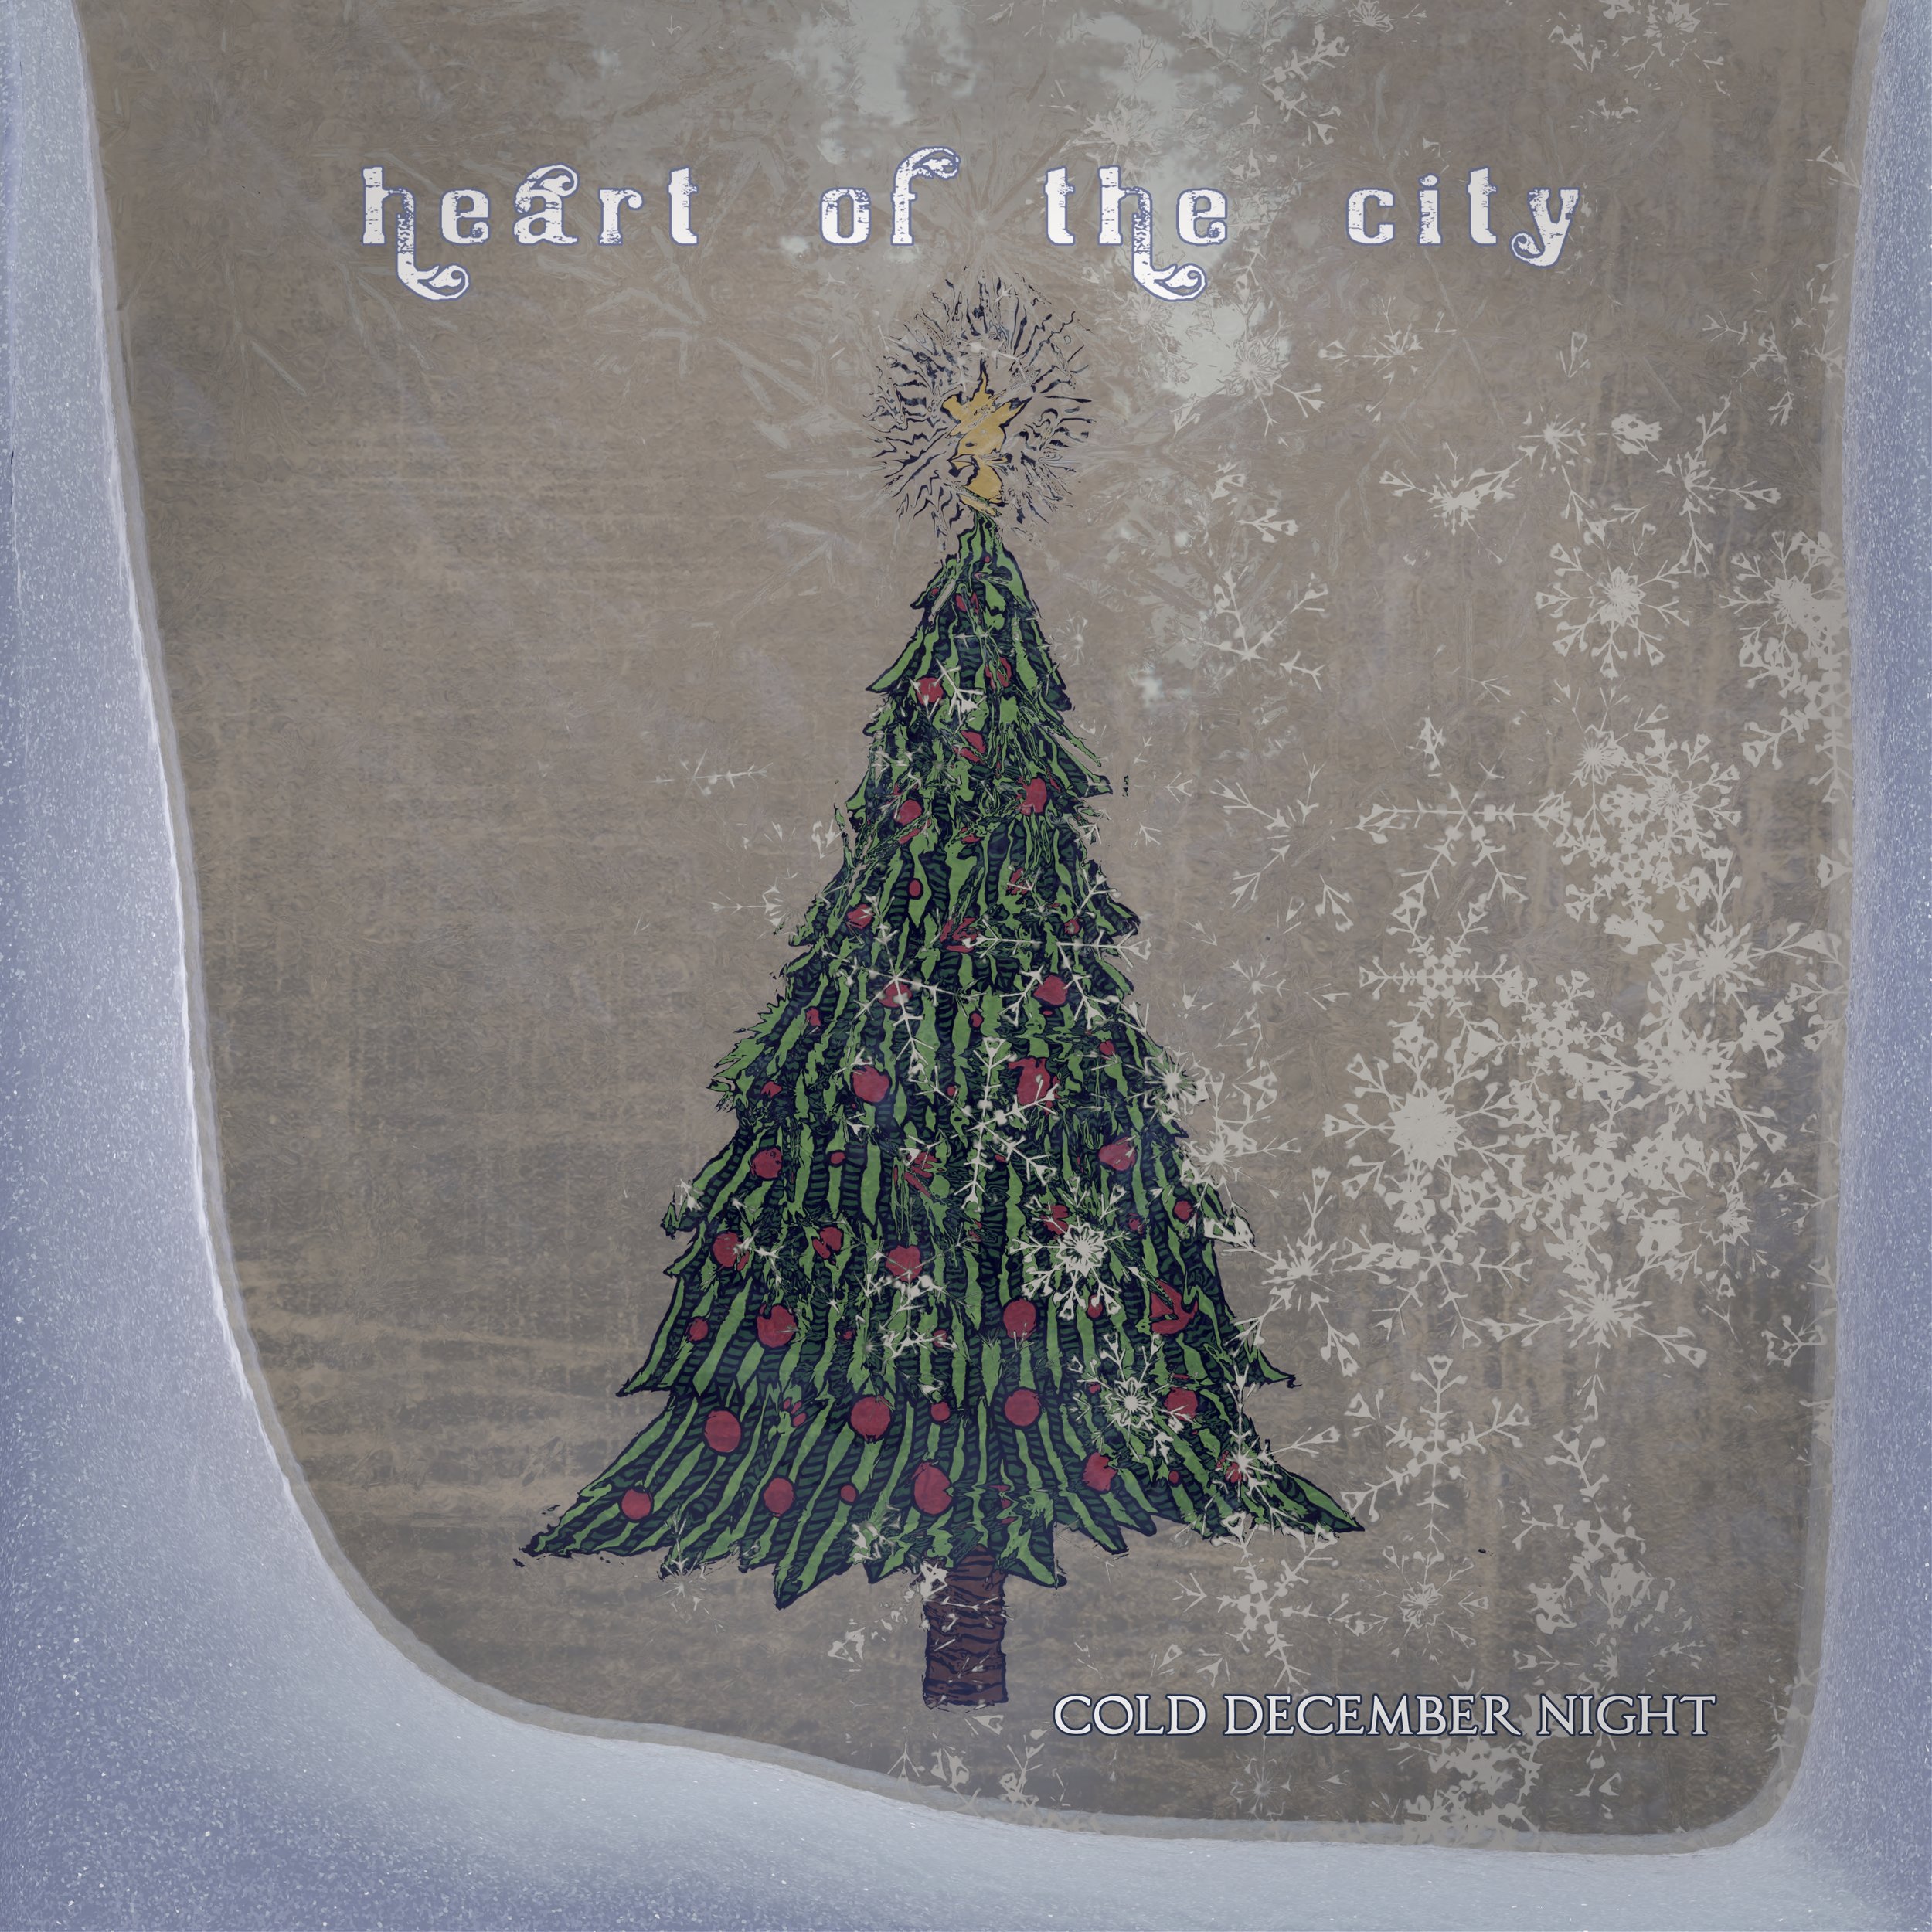 Heart of the City "Cold December Night" Single Cover